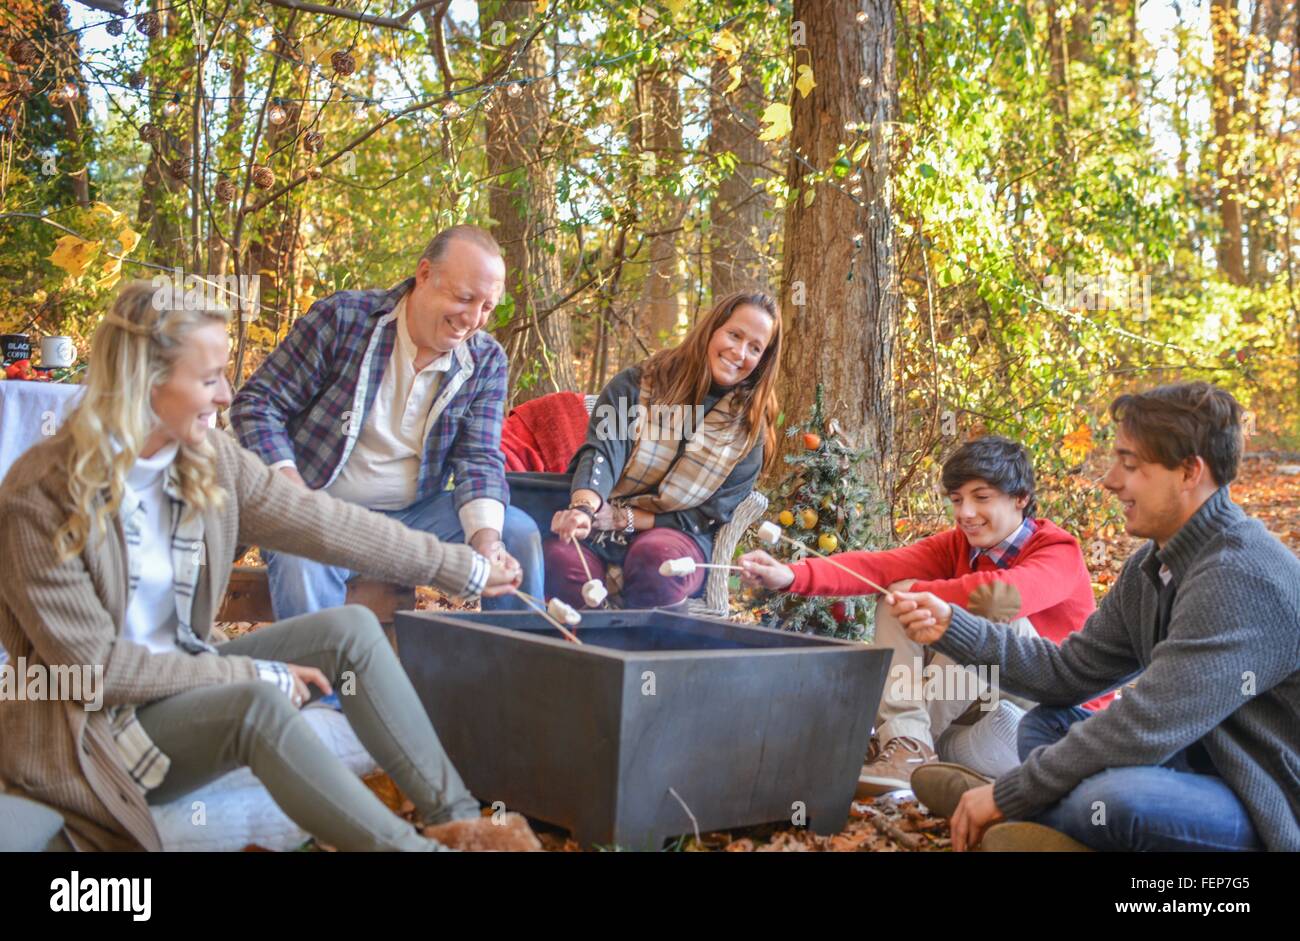 Parents with adult and teenage children toasting marshmallows in woods Stock Photo